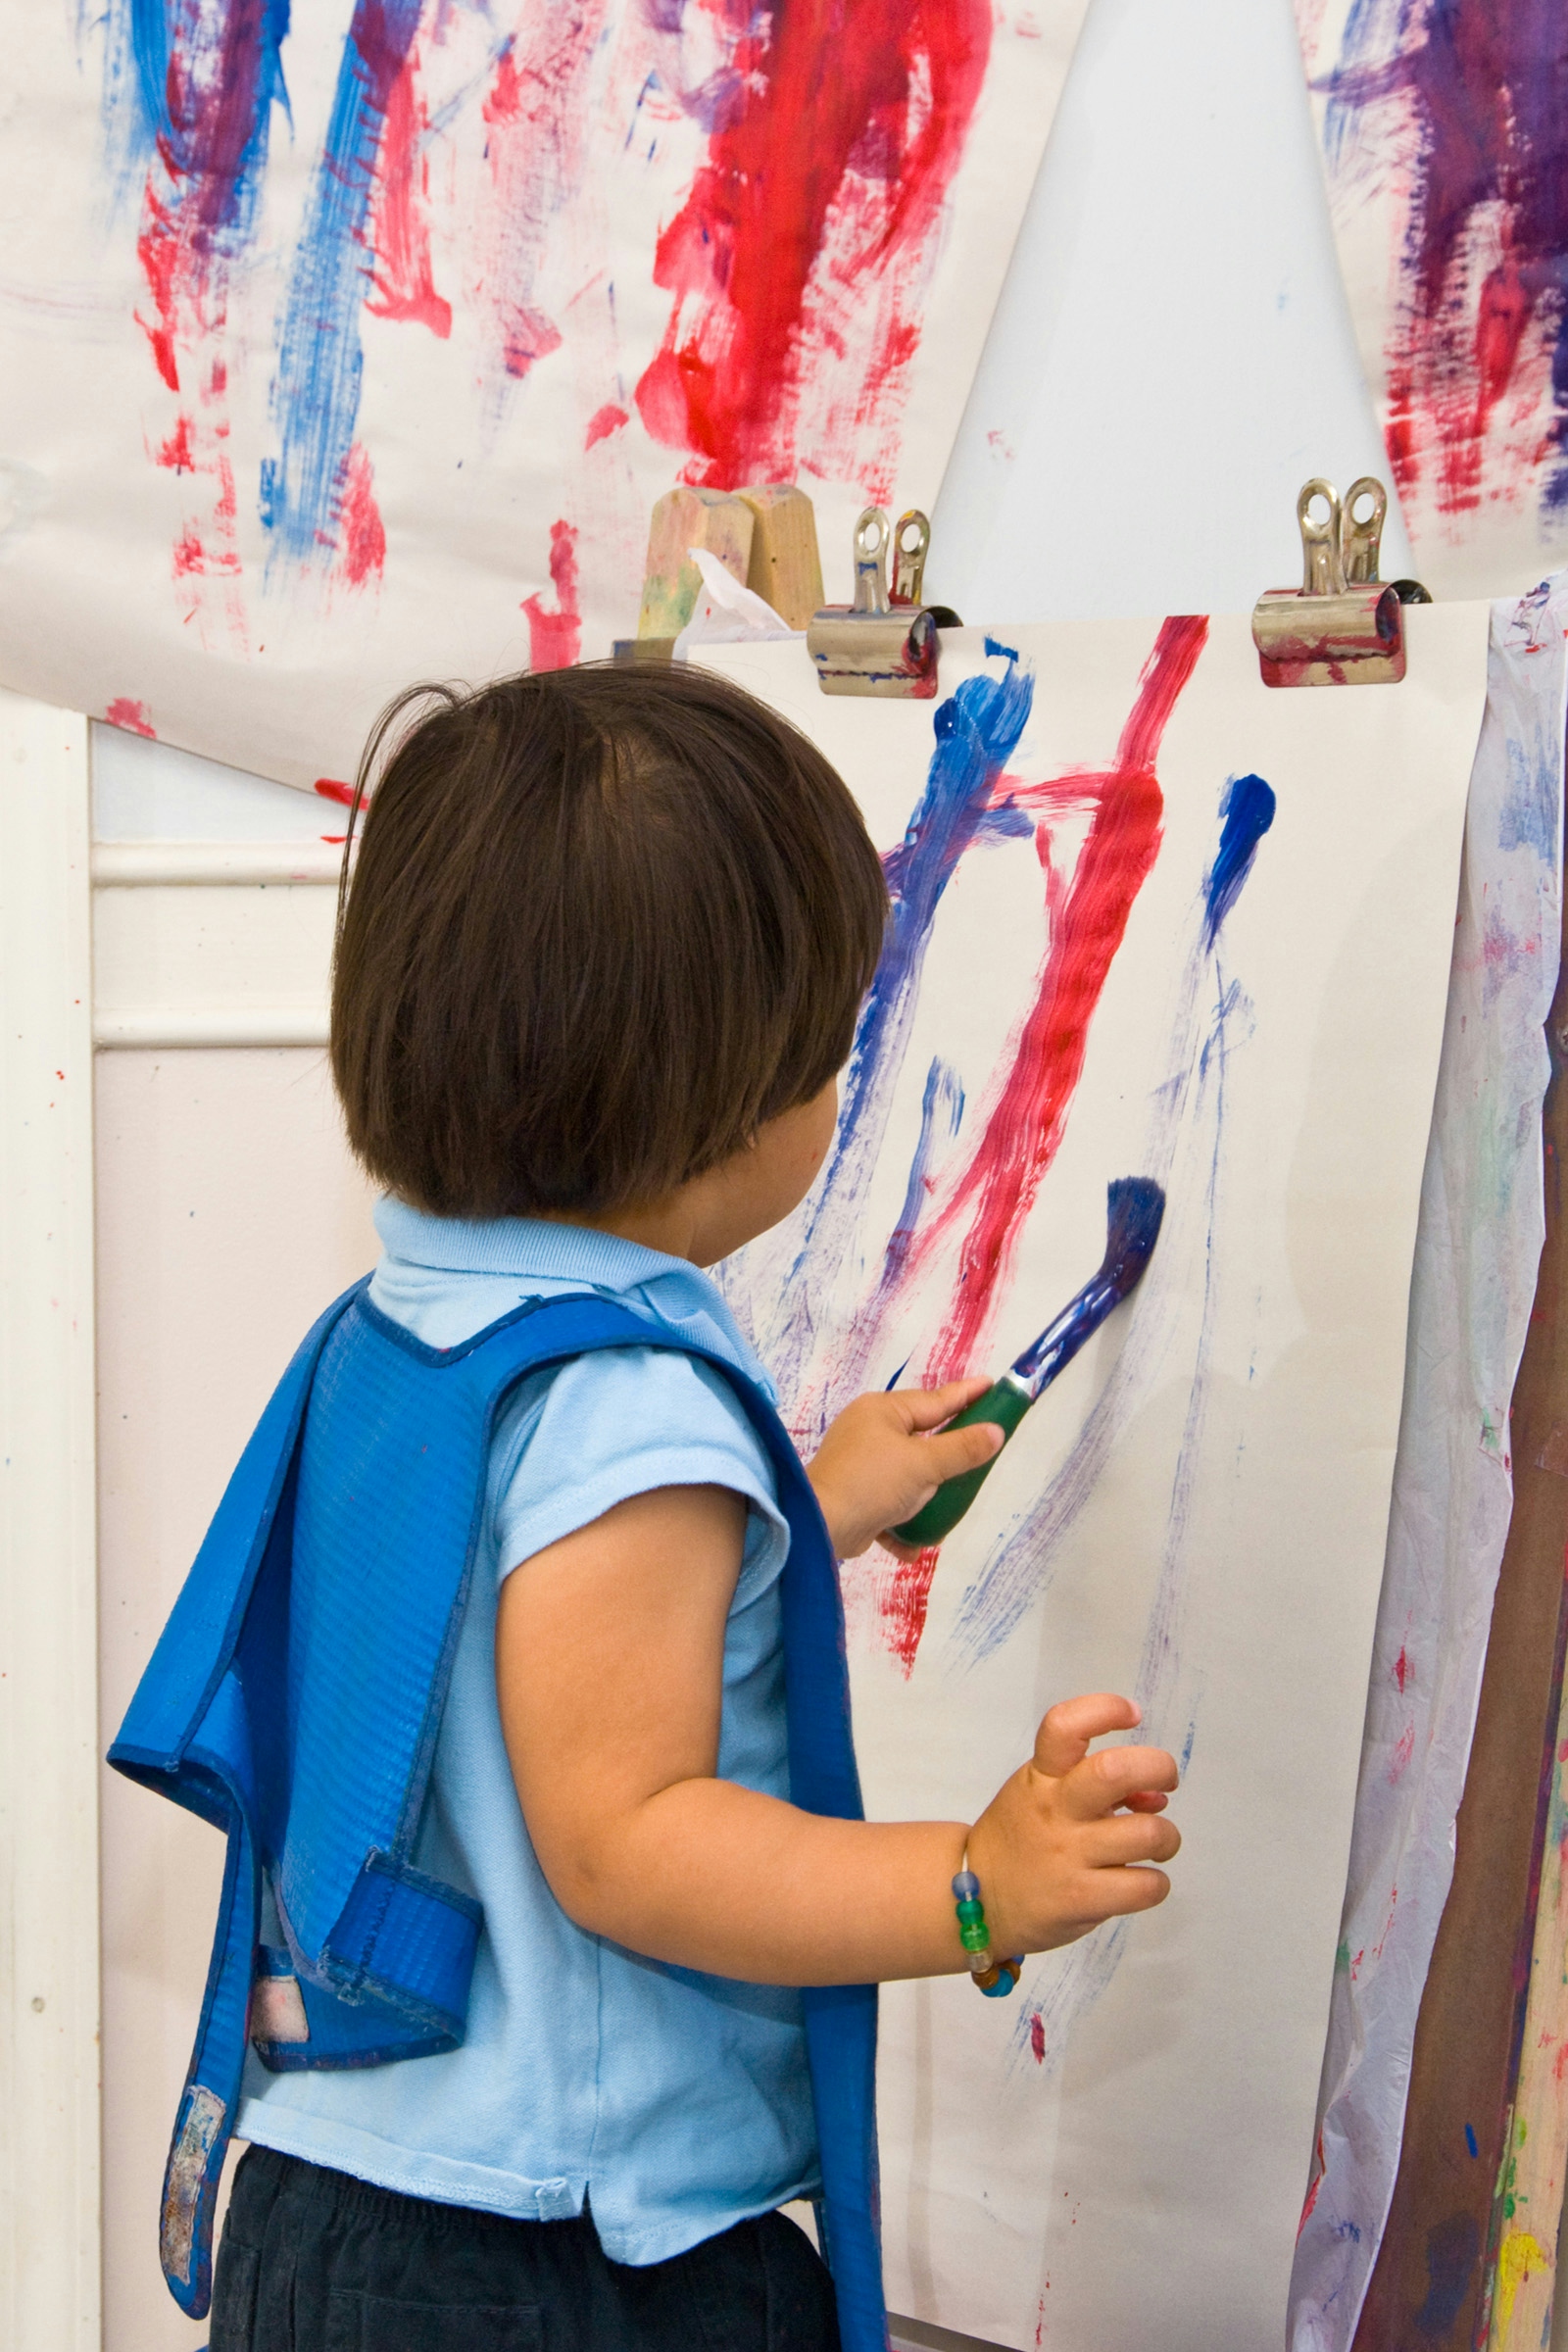 Toddler (age 2) paints with red and blue paint at daycare